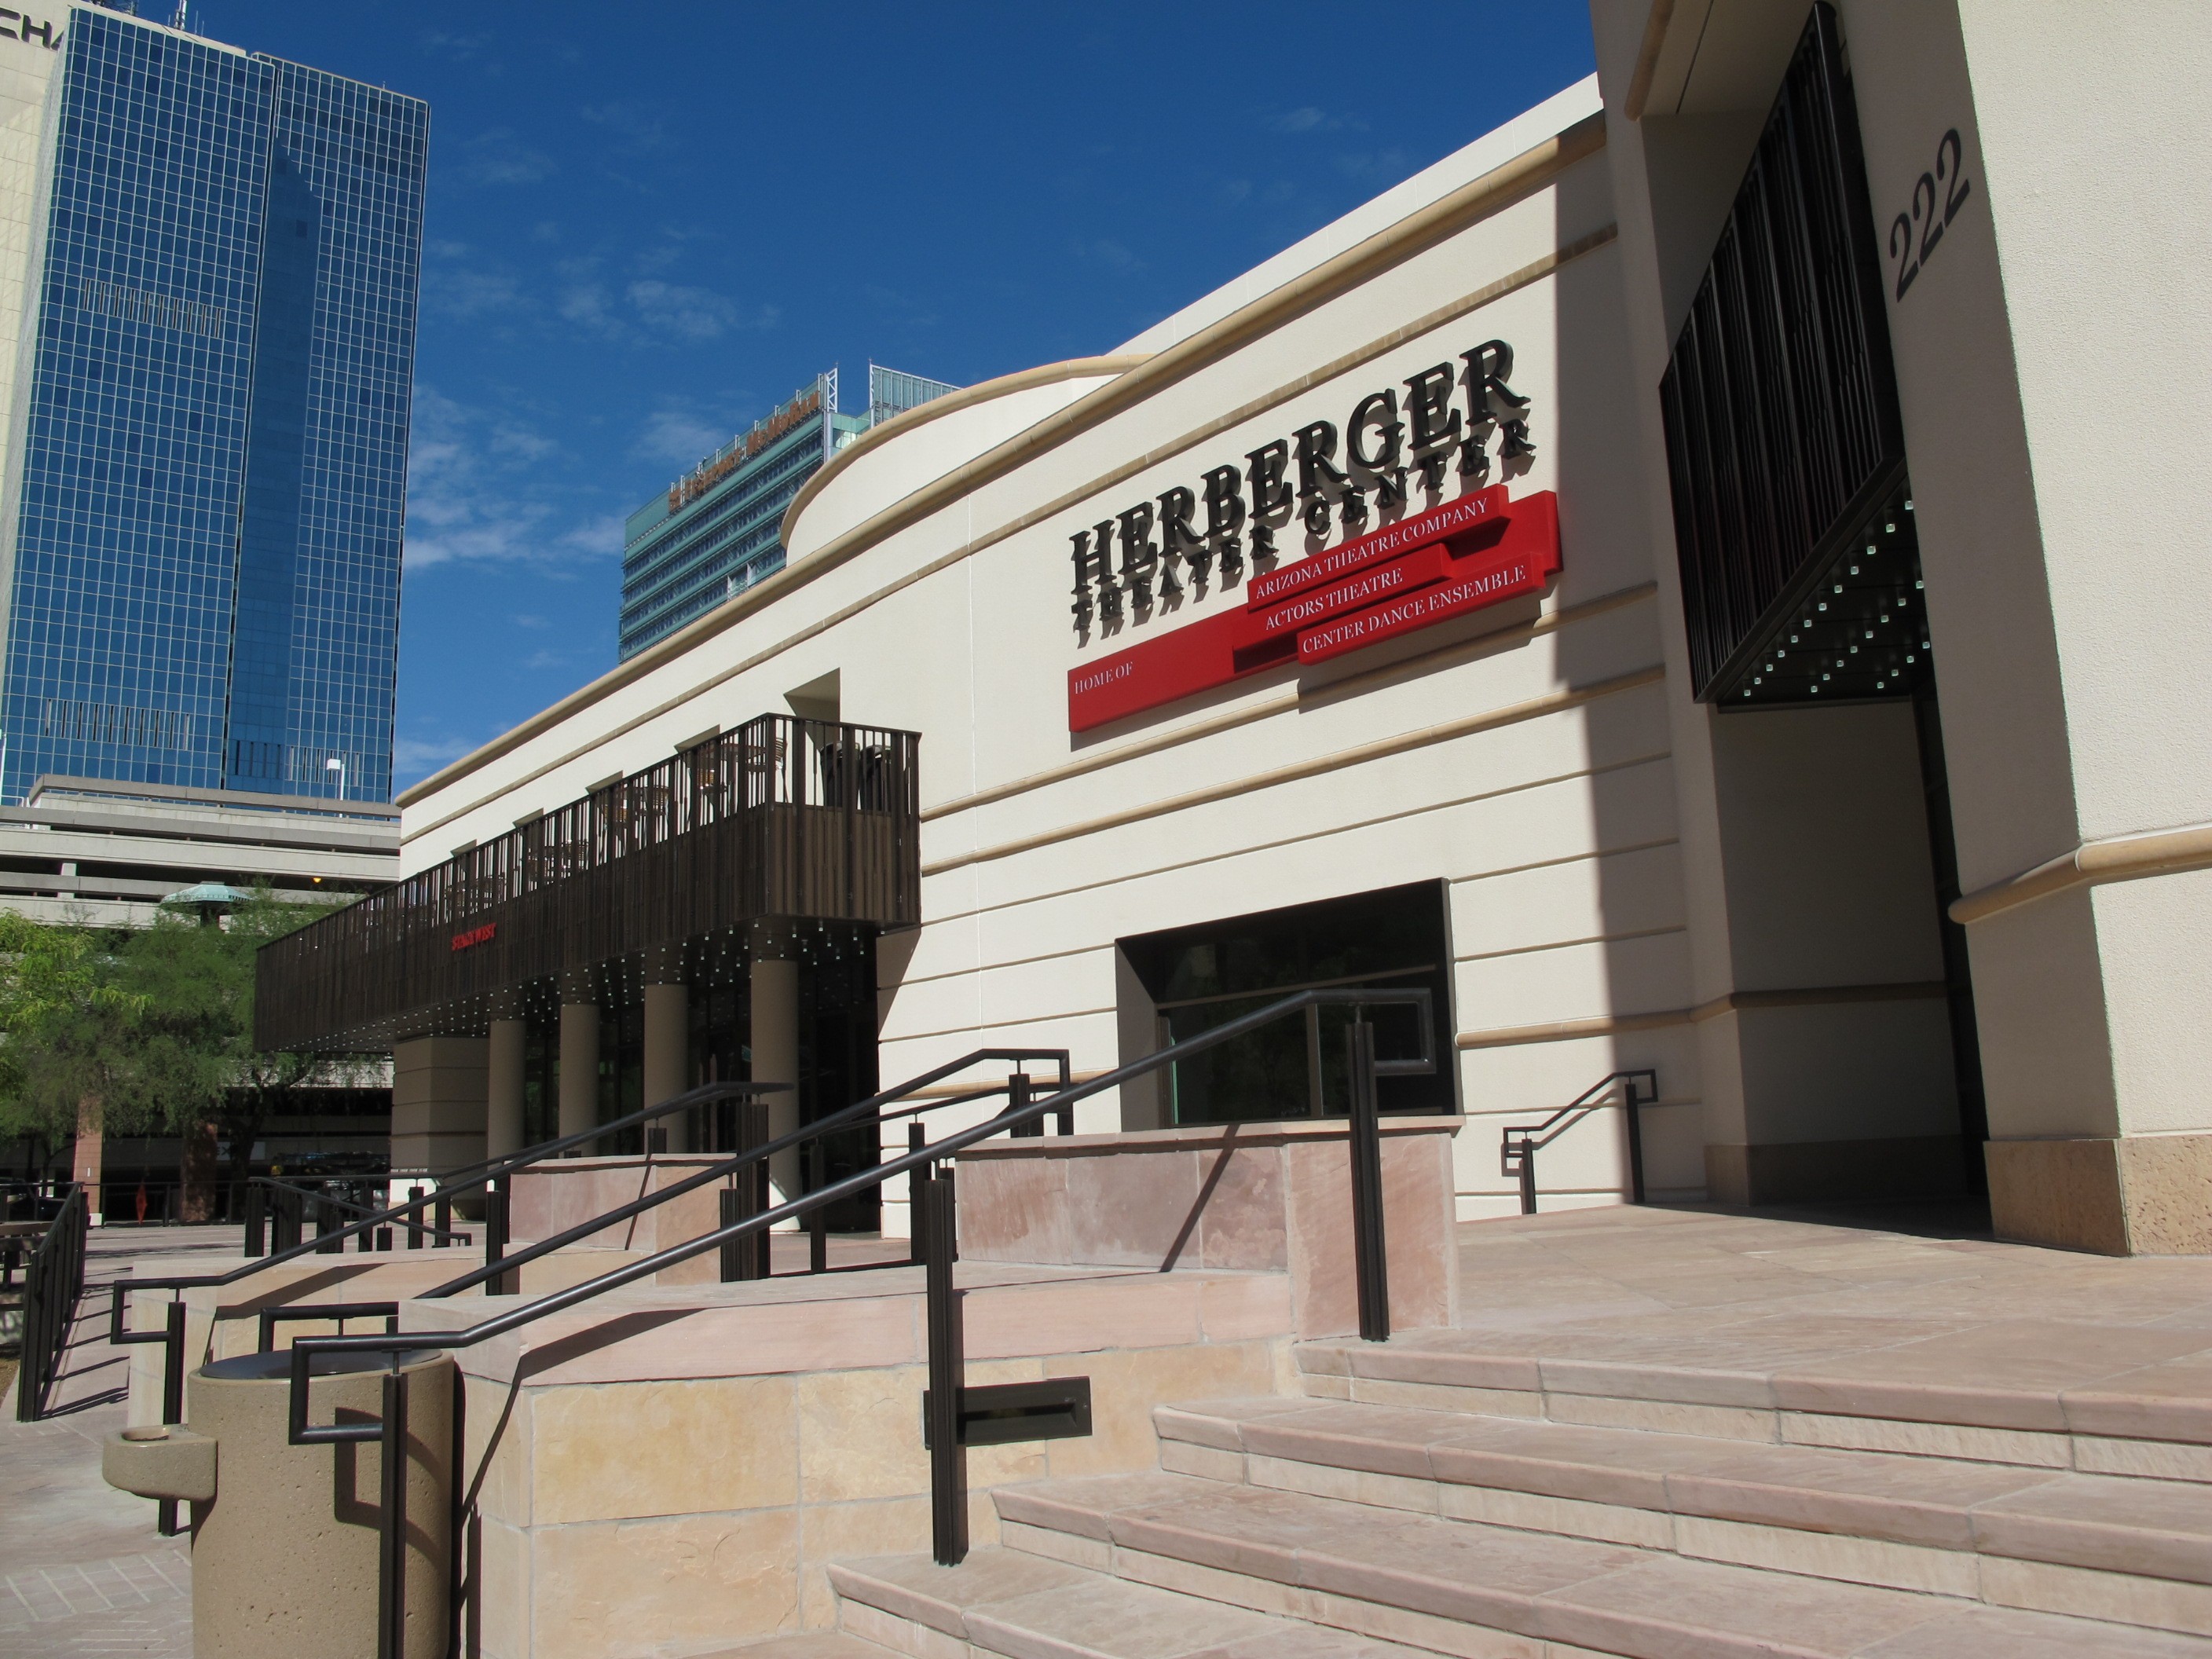 Actors Theatre of Phoenix becomes a resident company at the new Herberger Theater Center in Phoenix, along with Arizona Theatre Company and Center Dance Ensemble.